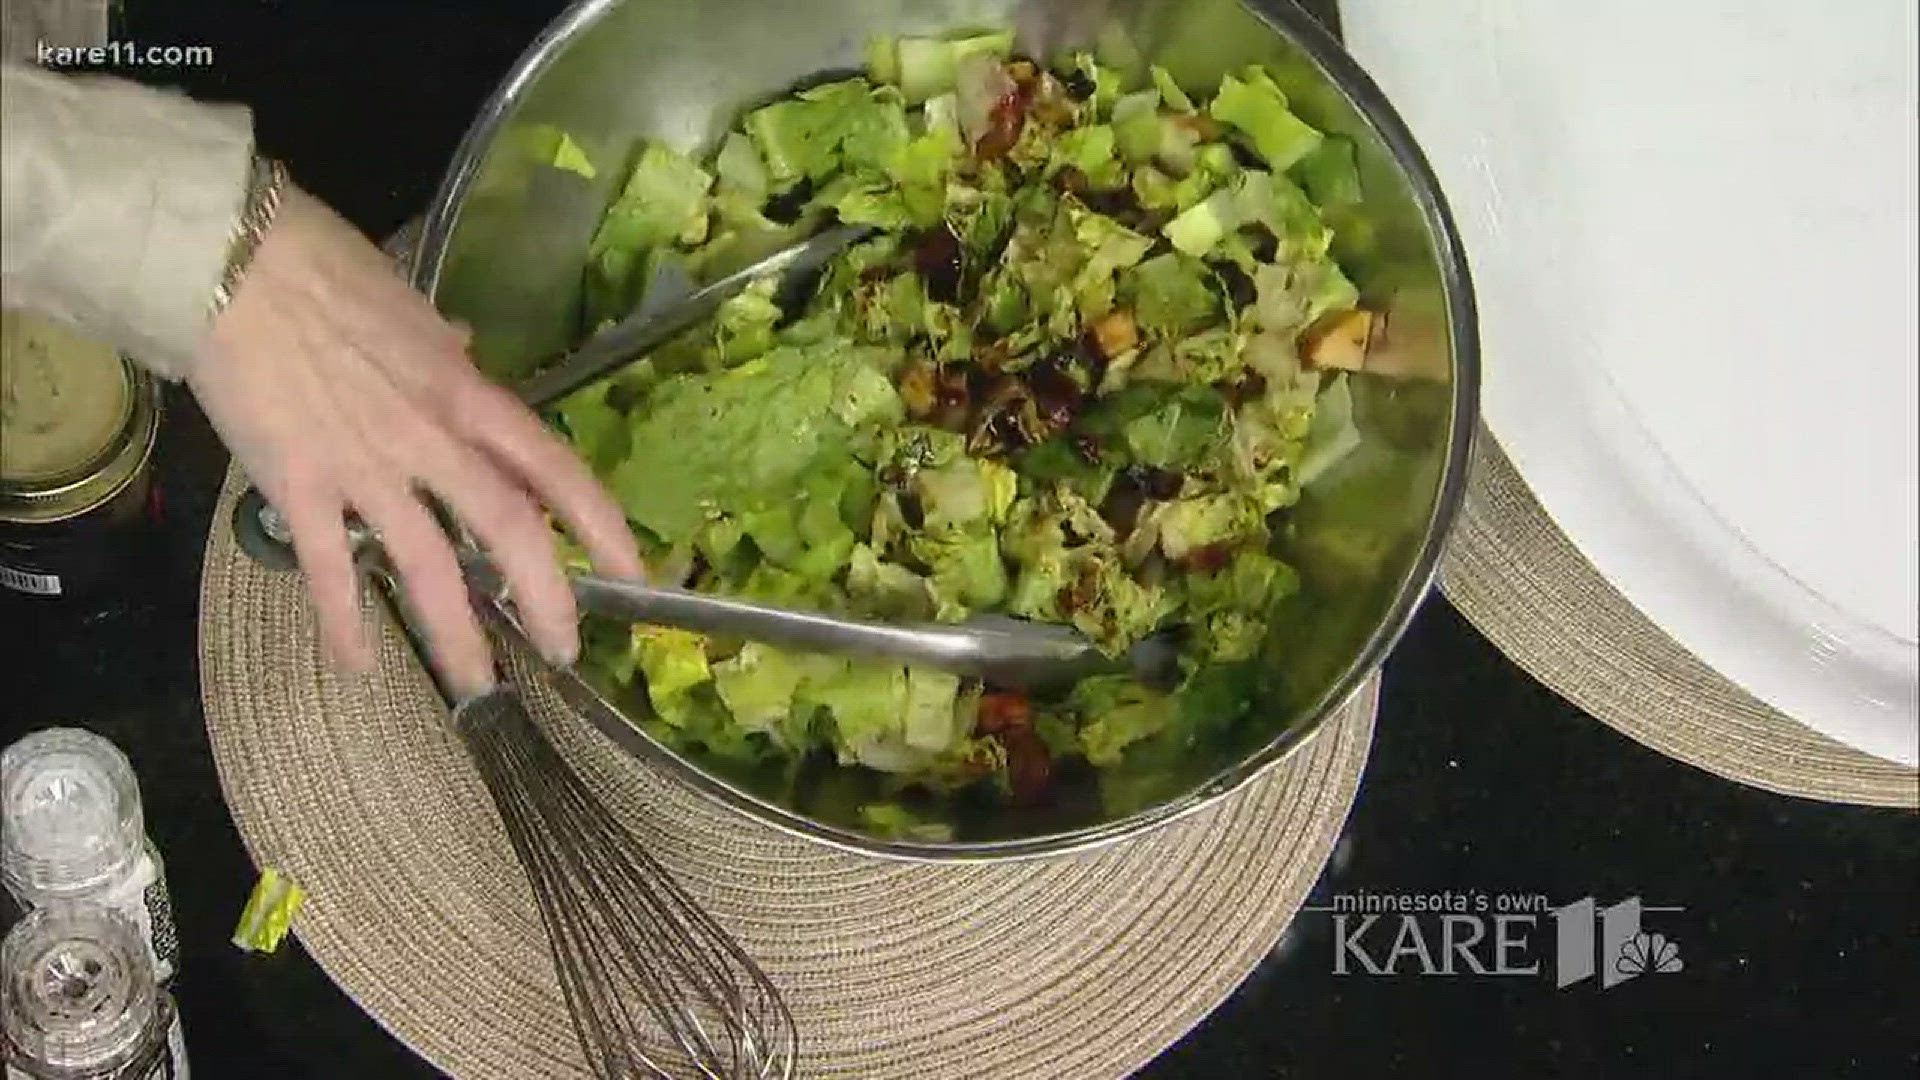 Kowalski's Culinary Director, Chef Rachael Perron, has some cool tips that will transform every single salad you make into a culinary creation. http://kare11.tv/2HIGMtT